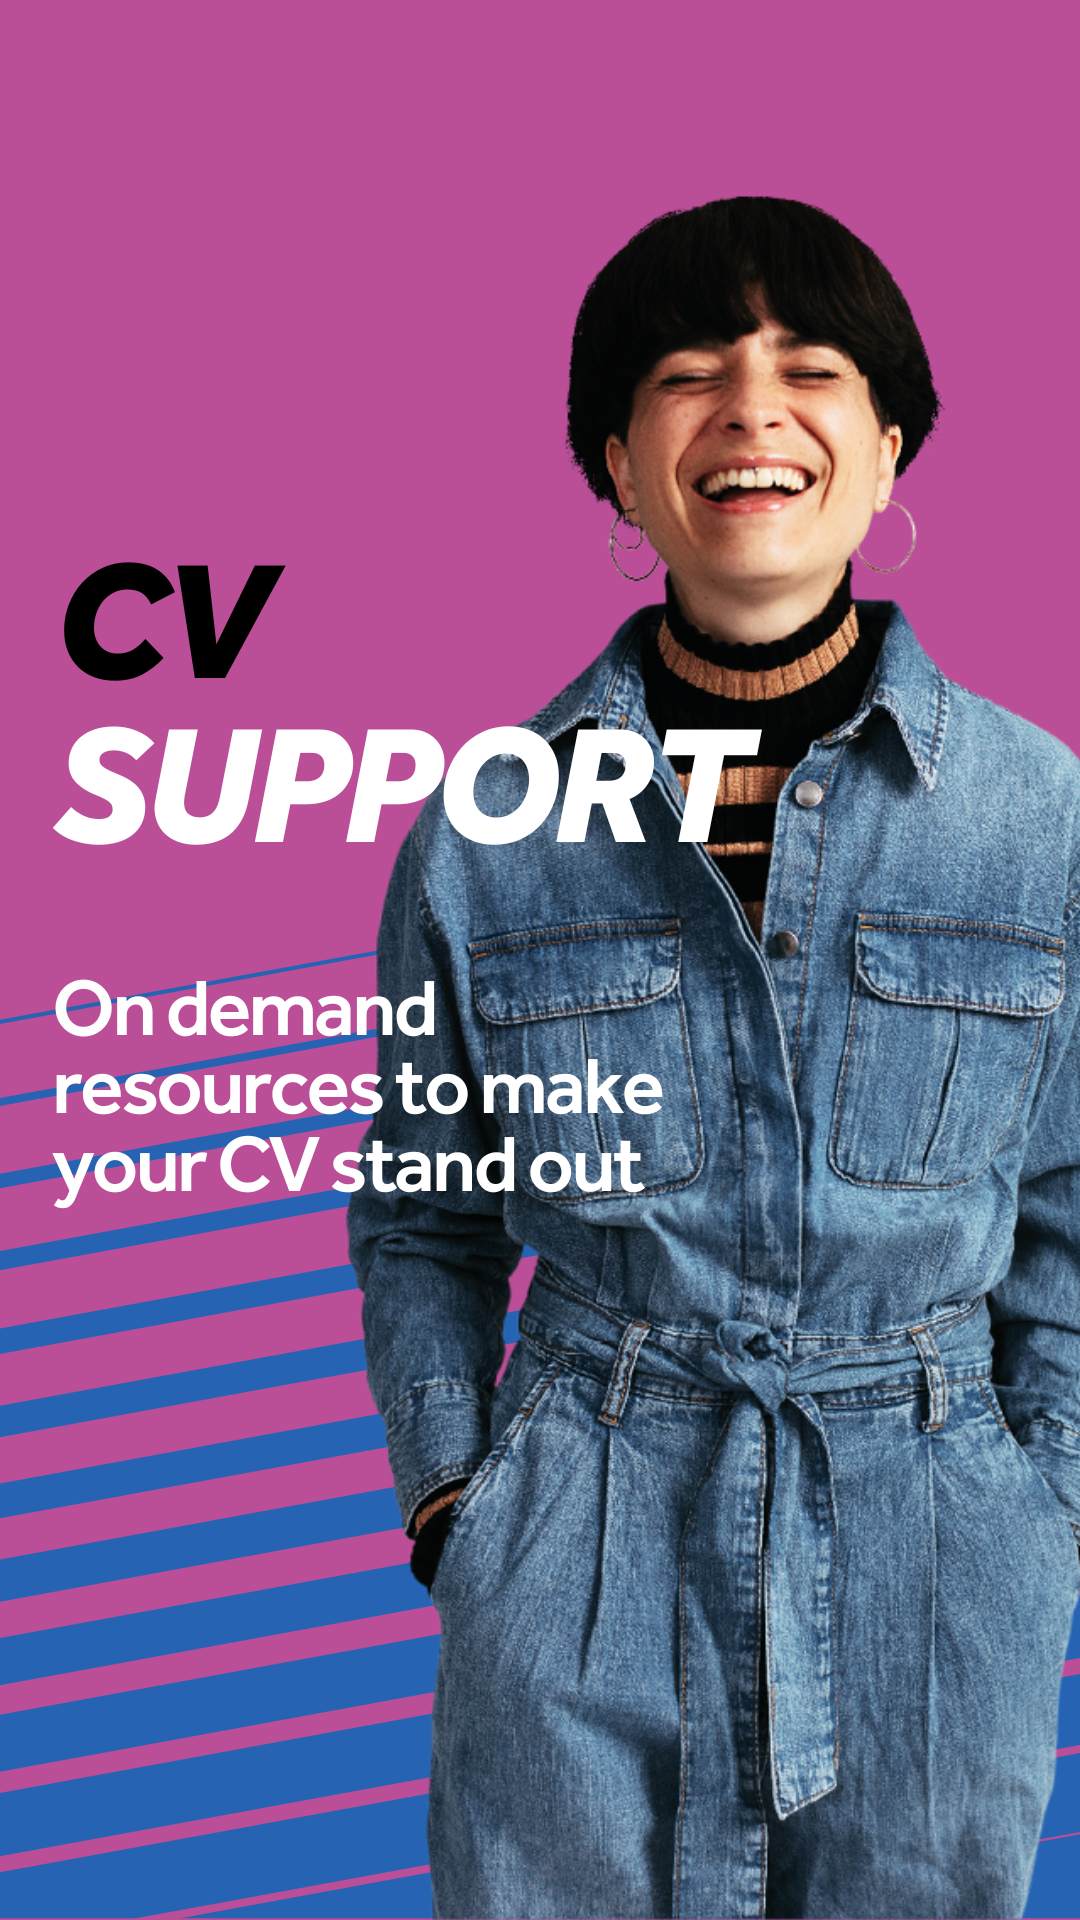 Promotional image for CV pathway showing CV learning guide